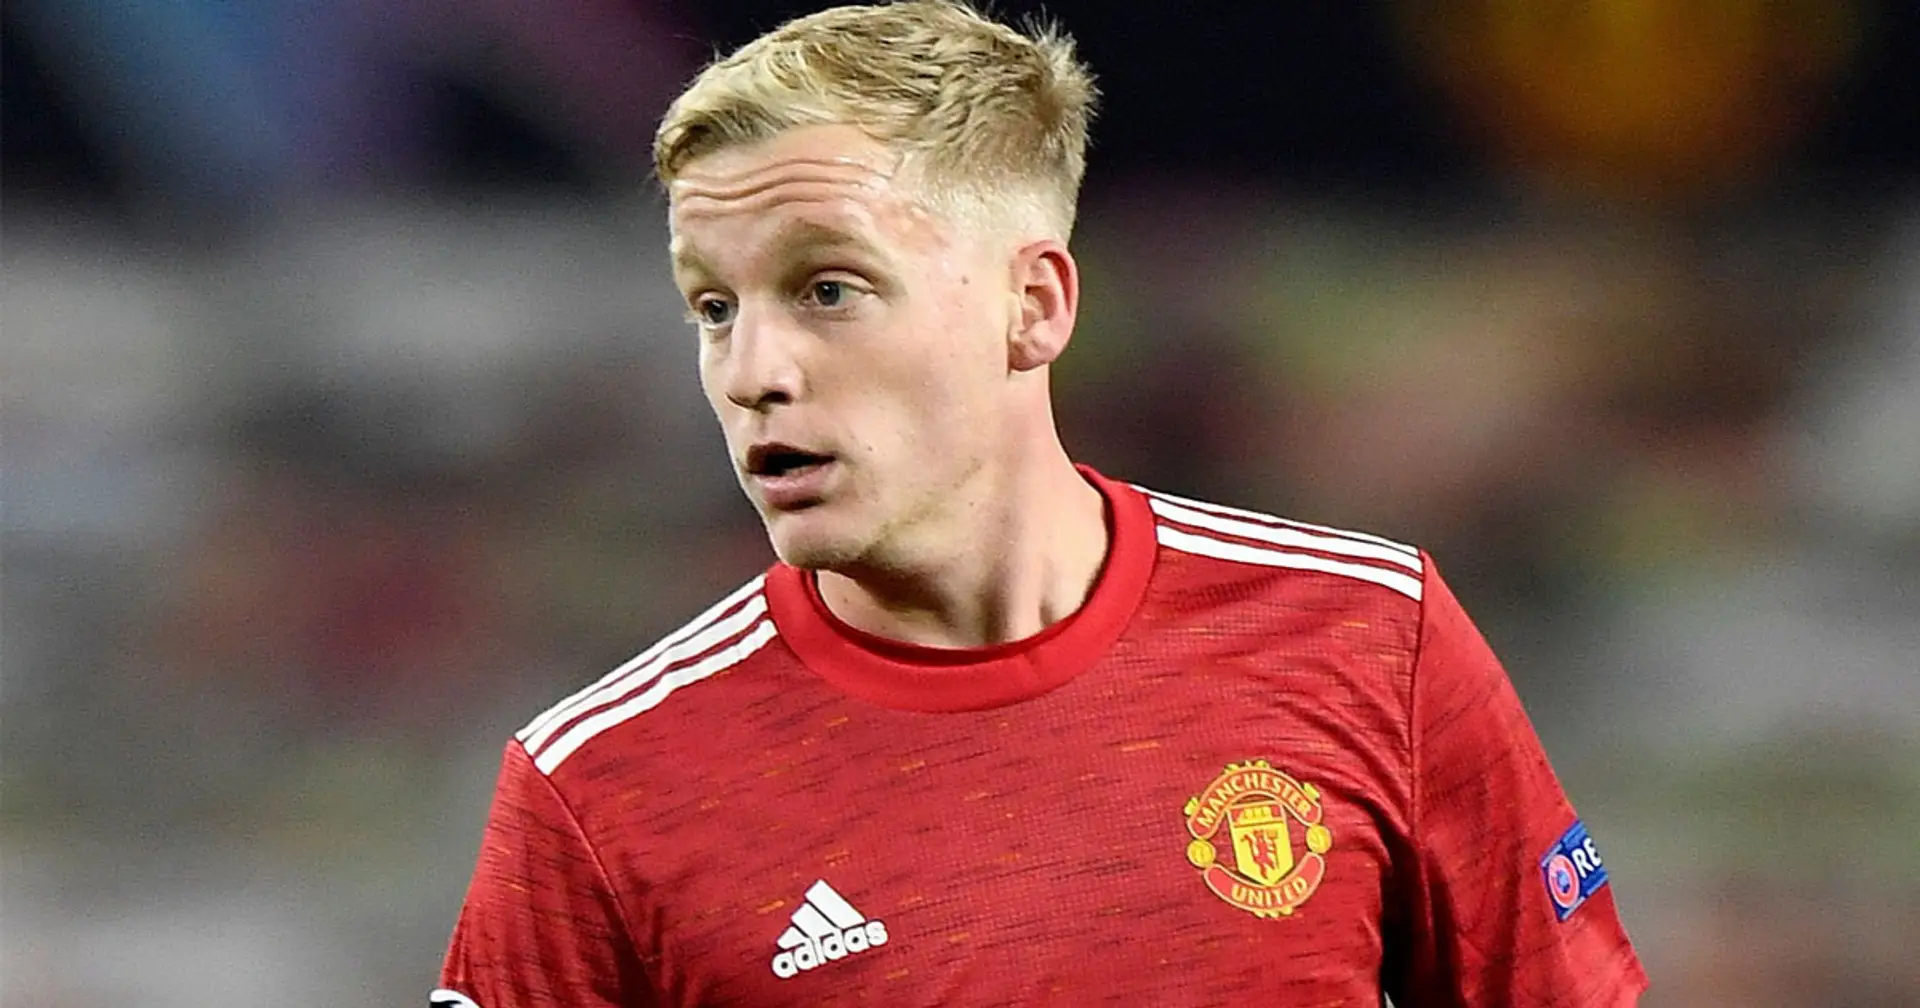 ‘You have to get used to different competitions’: Frank de Boer confident Van de Beek will start getting more chances at United soon